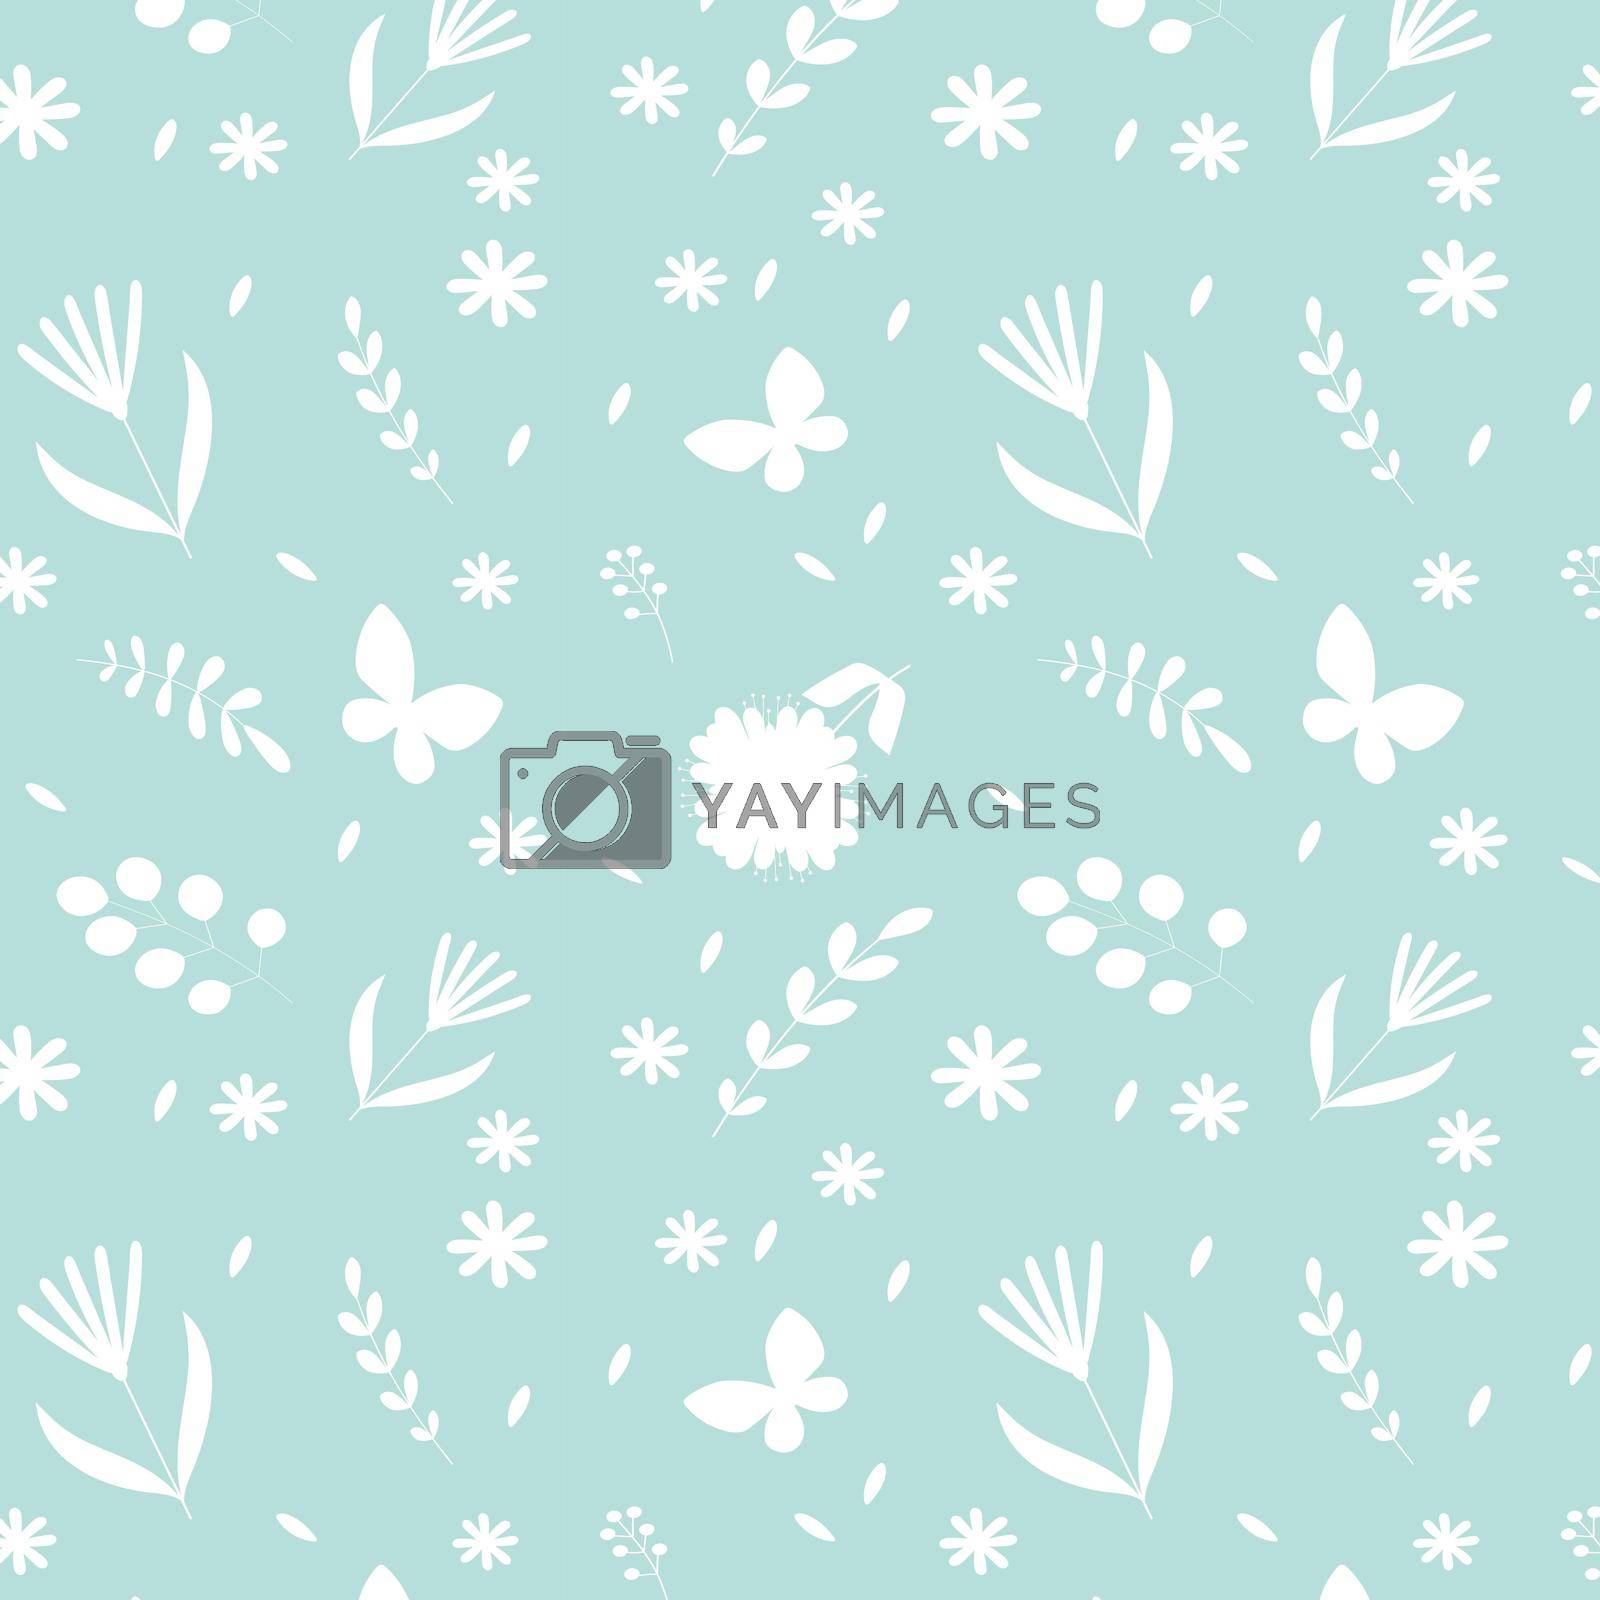 Royalty free image of Seamless floral pattern by tan4ikk1